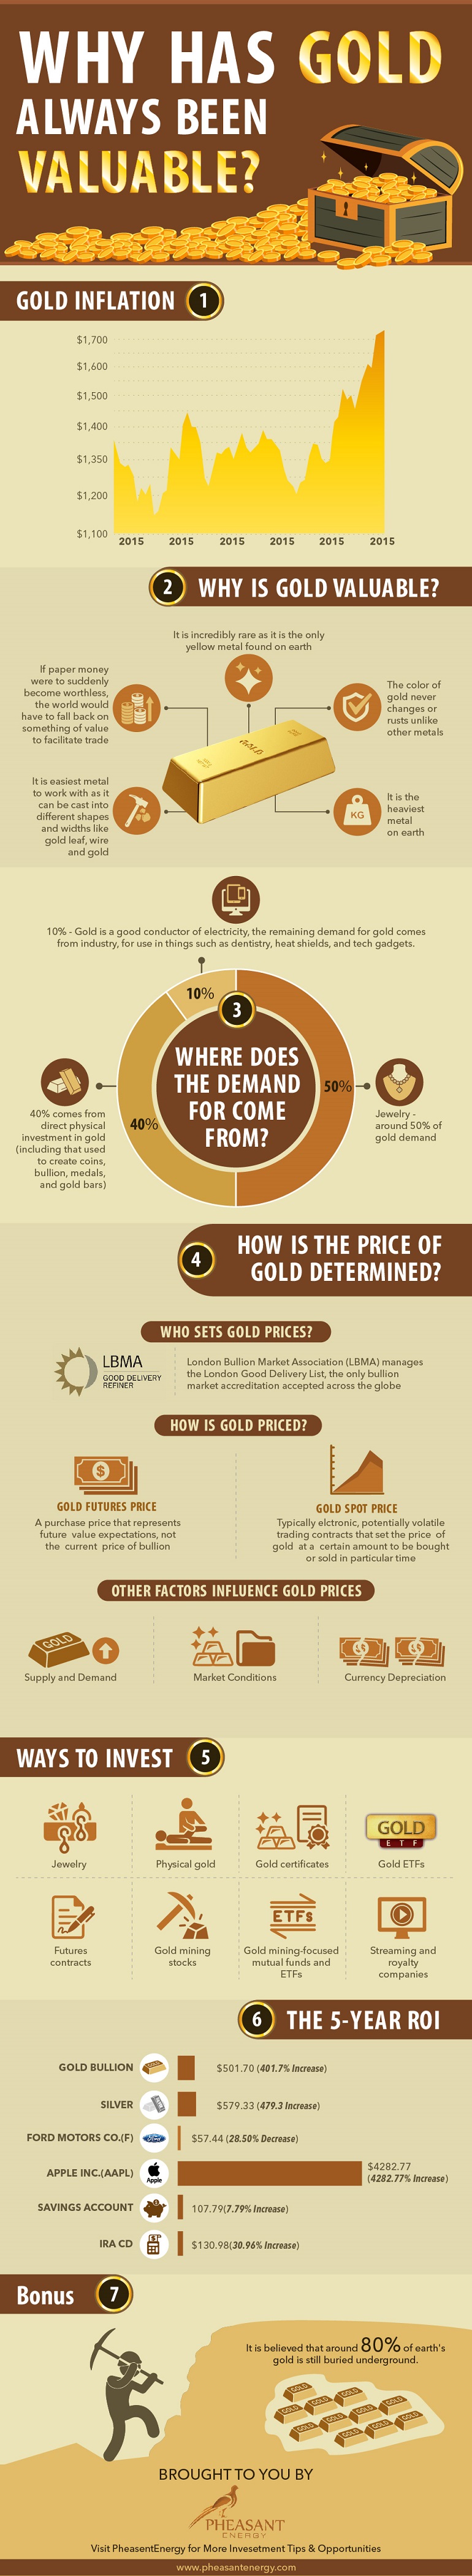 Is It Safe To Invest In Gold For Retirement? | PensionsWeek